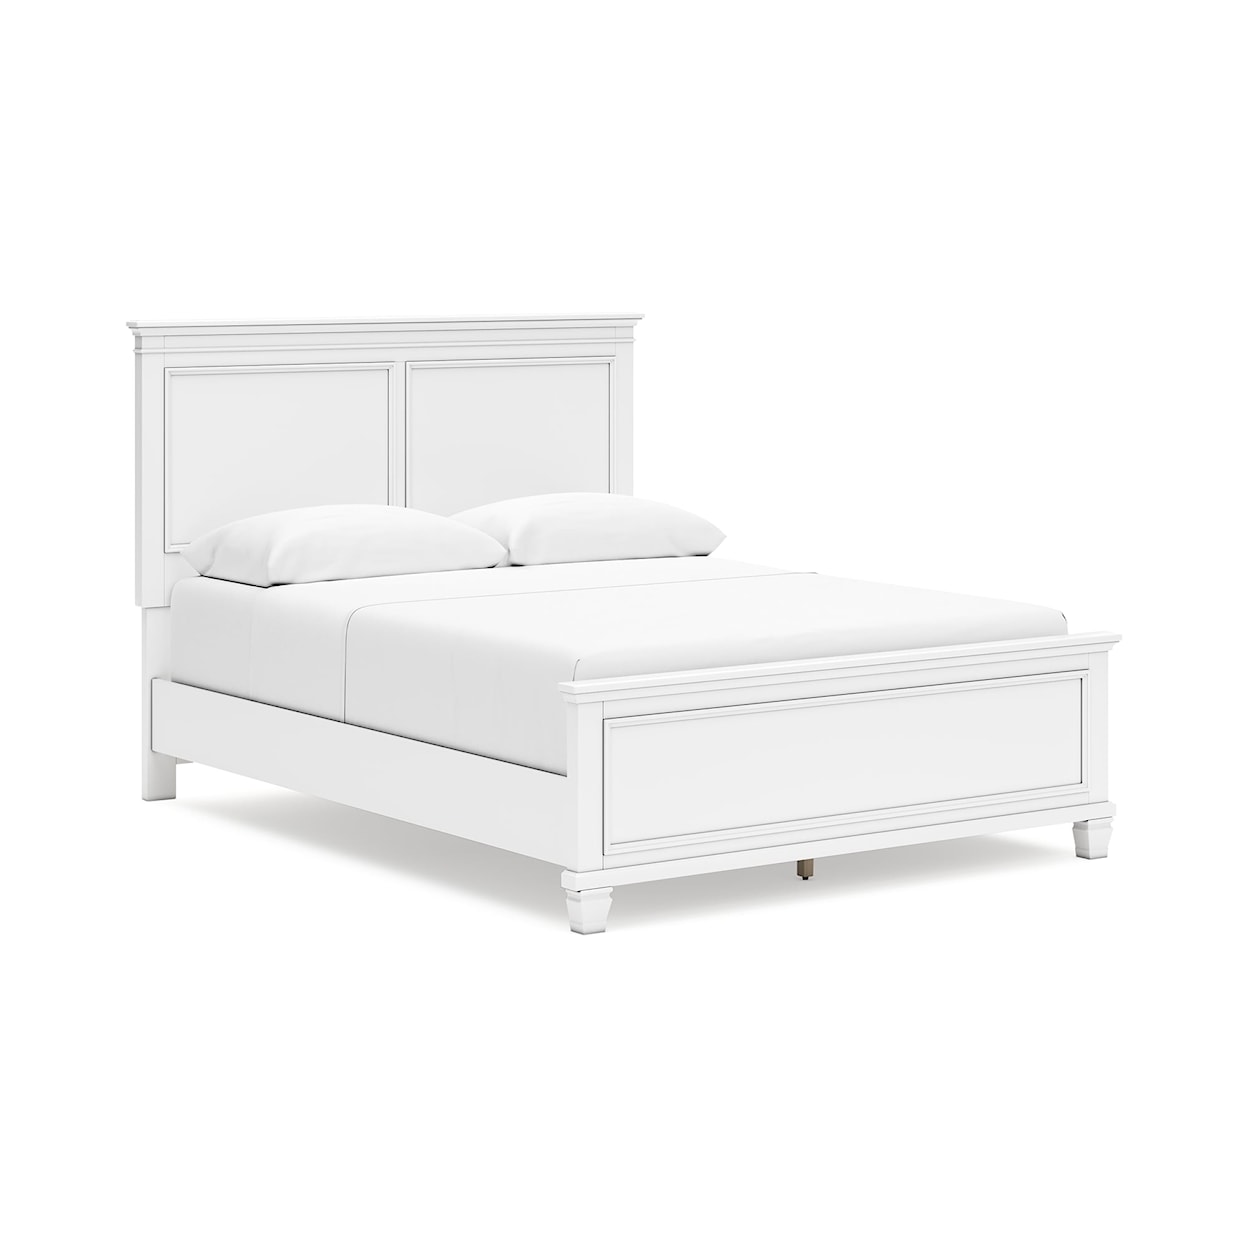 Signature Design by Ashley Fortman Queen Panel Bed